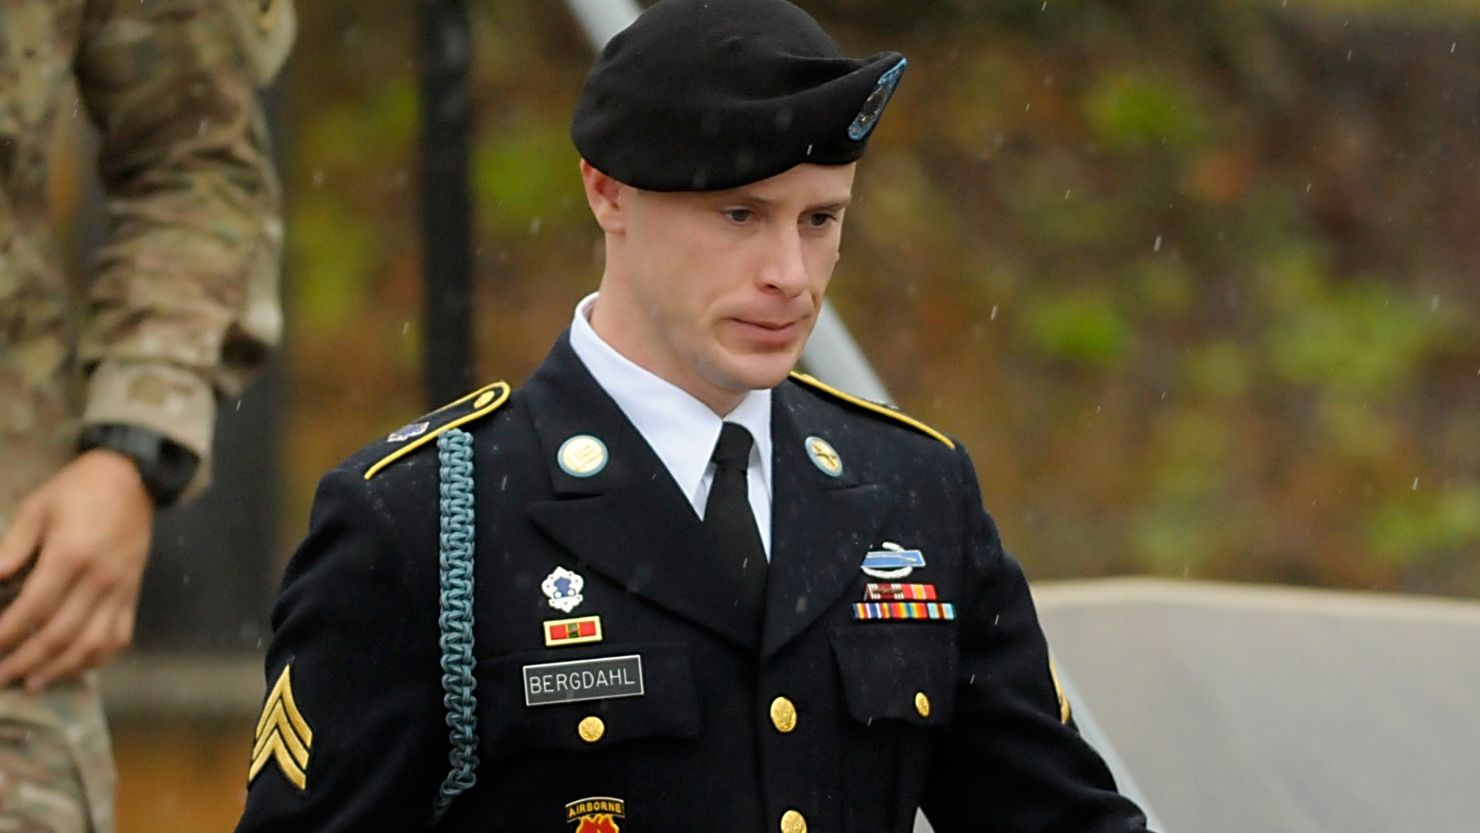 Then-Army Sgt. Bowe Bergdahl leaves a military courthouse on December 22, 2015, in Ft. Bragg, North Carolina. 